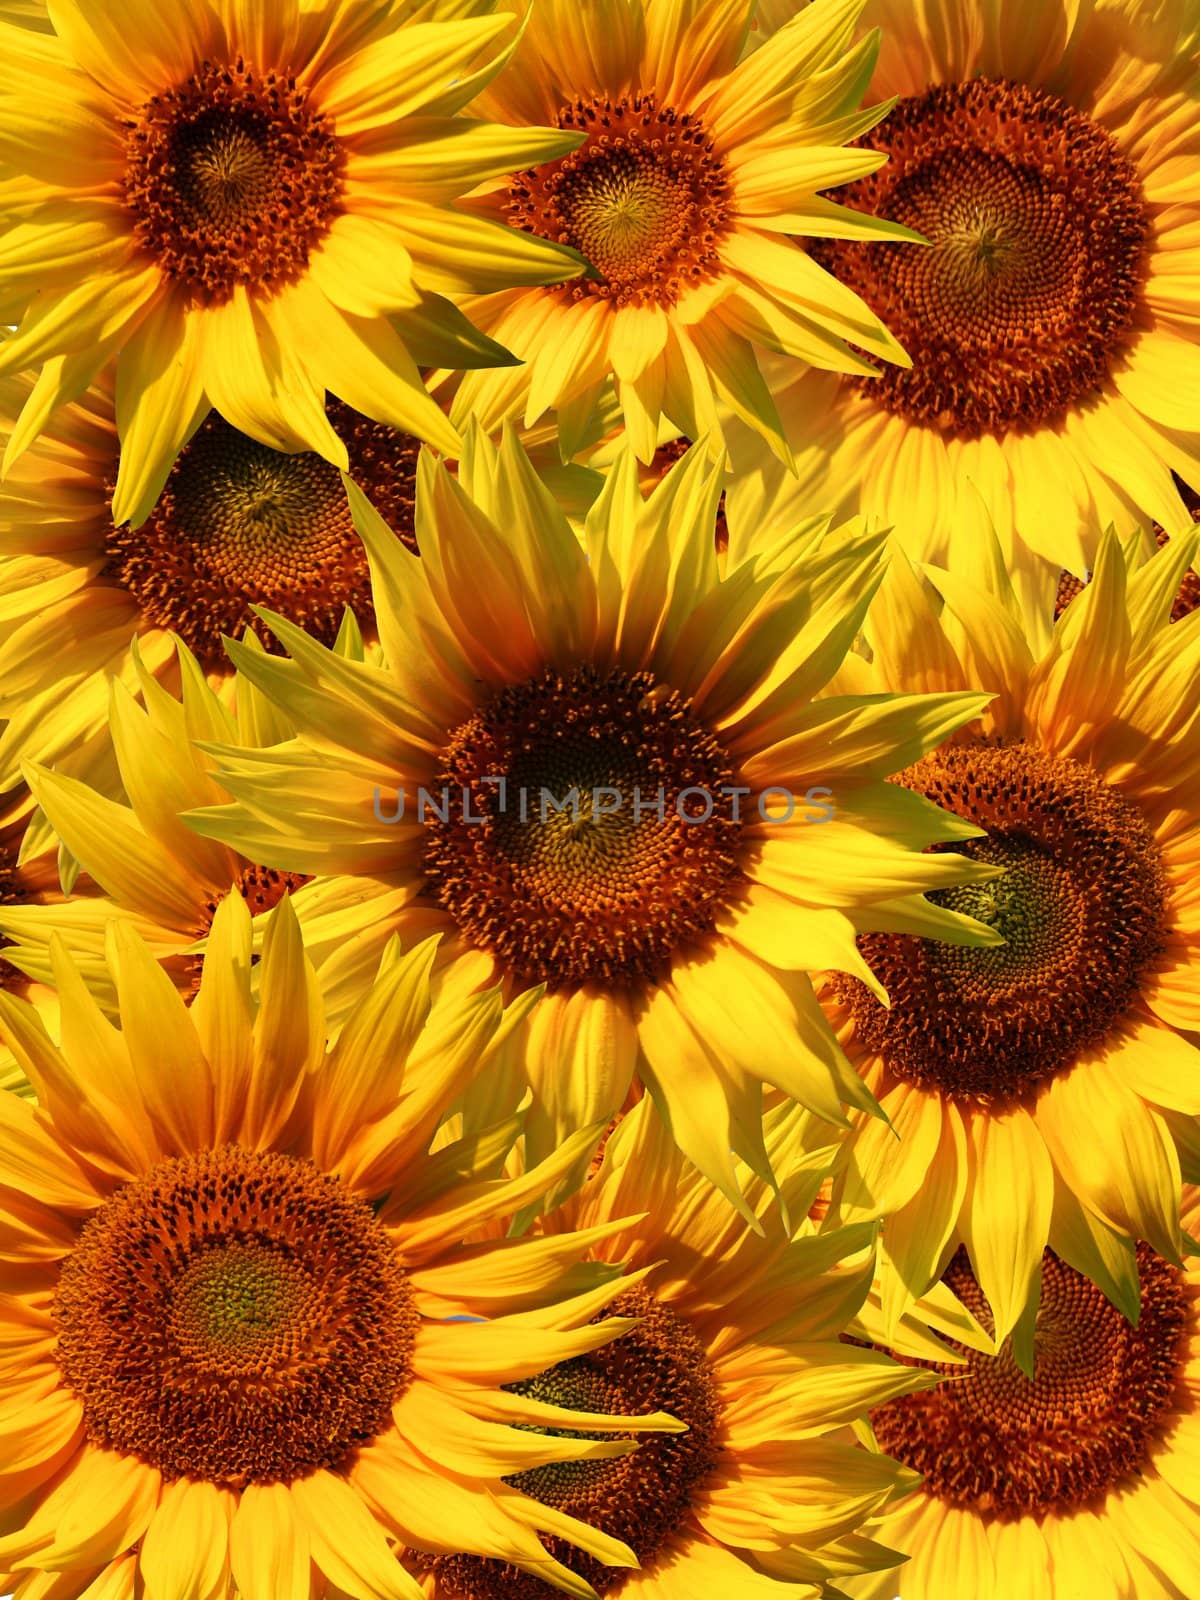 Sunflowers close up by velkol